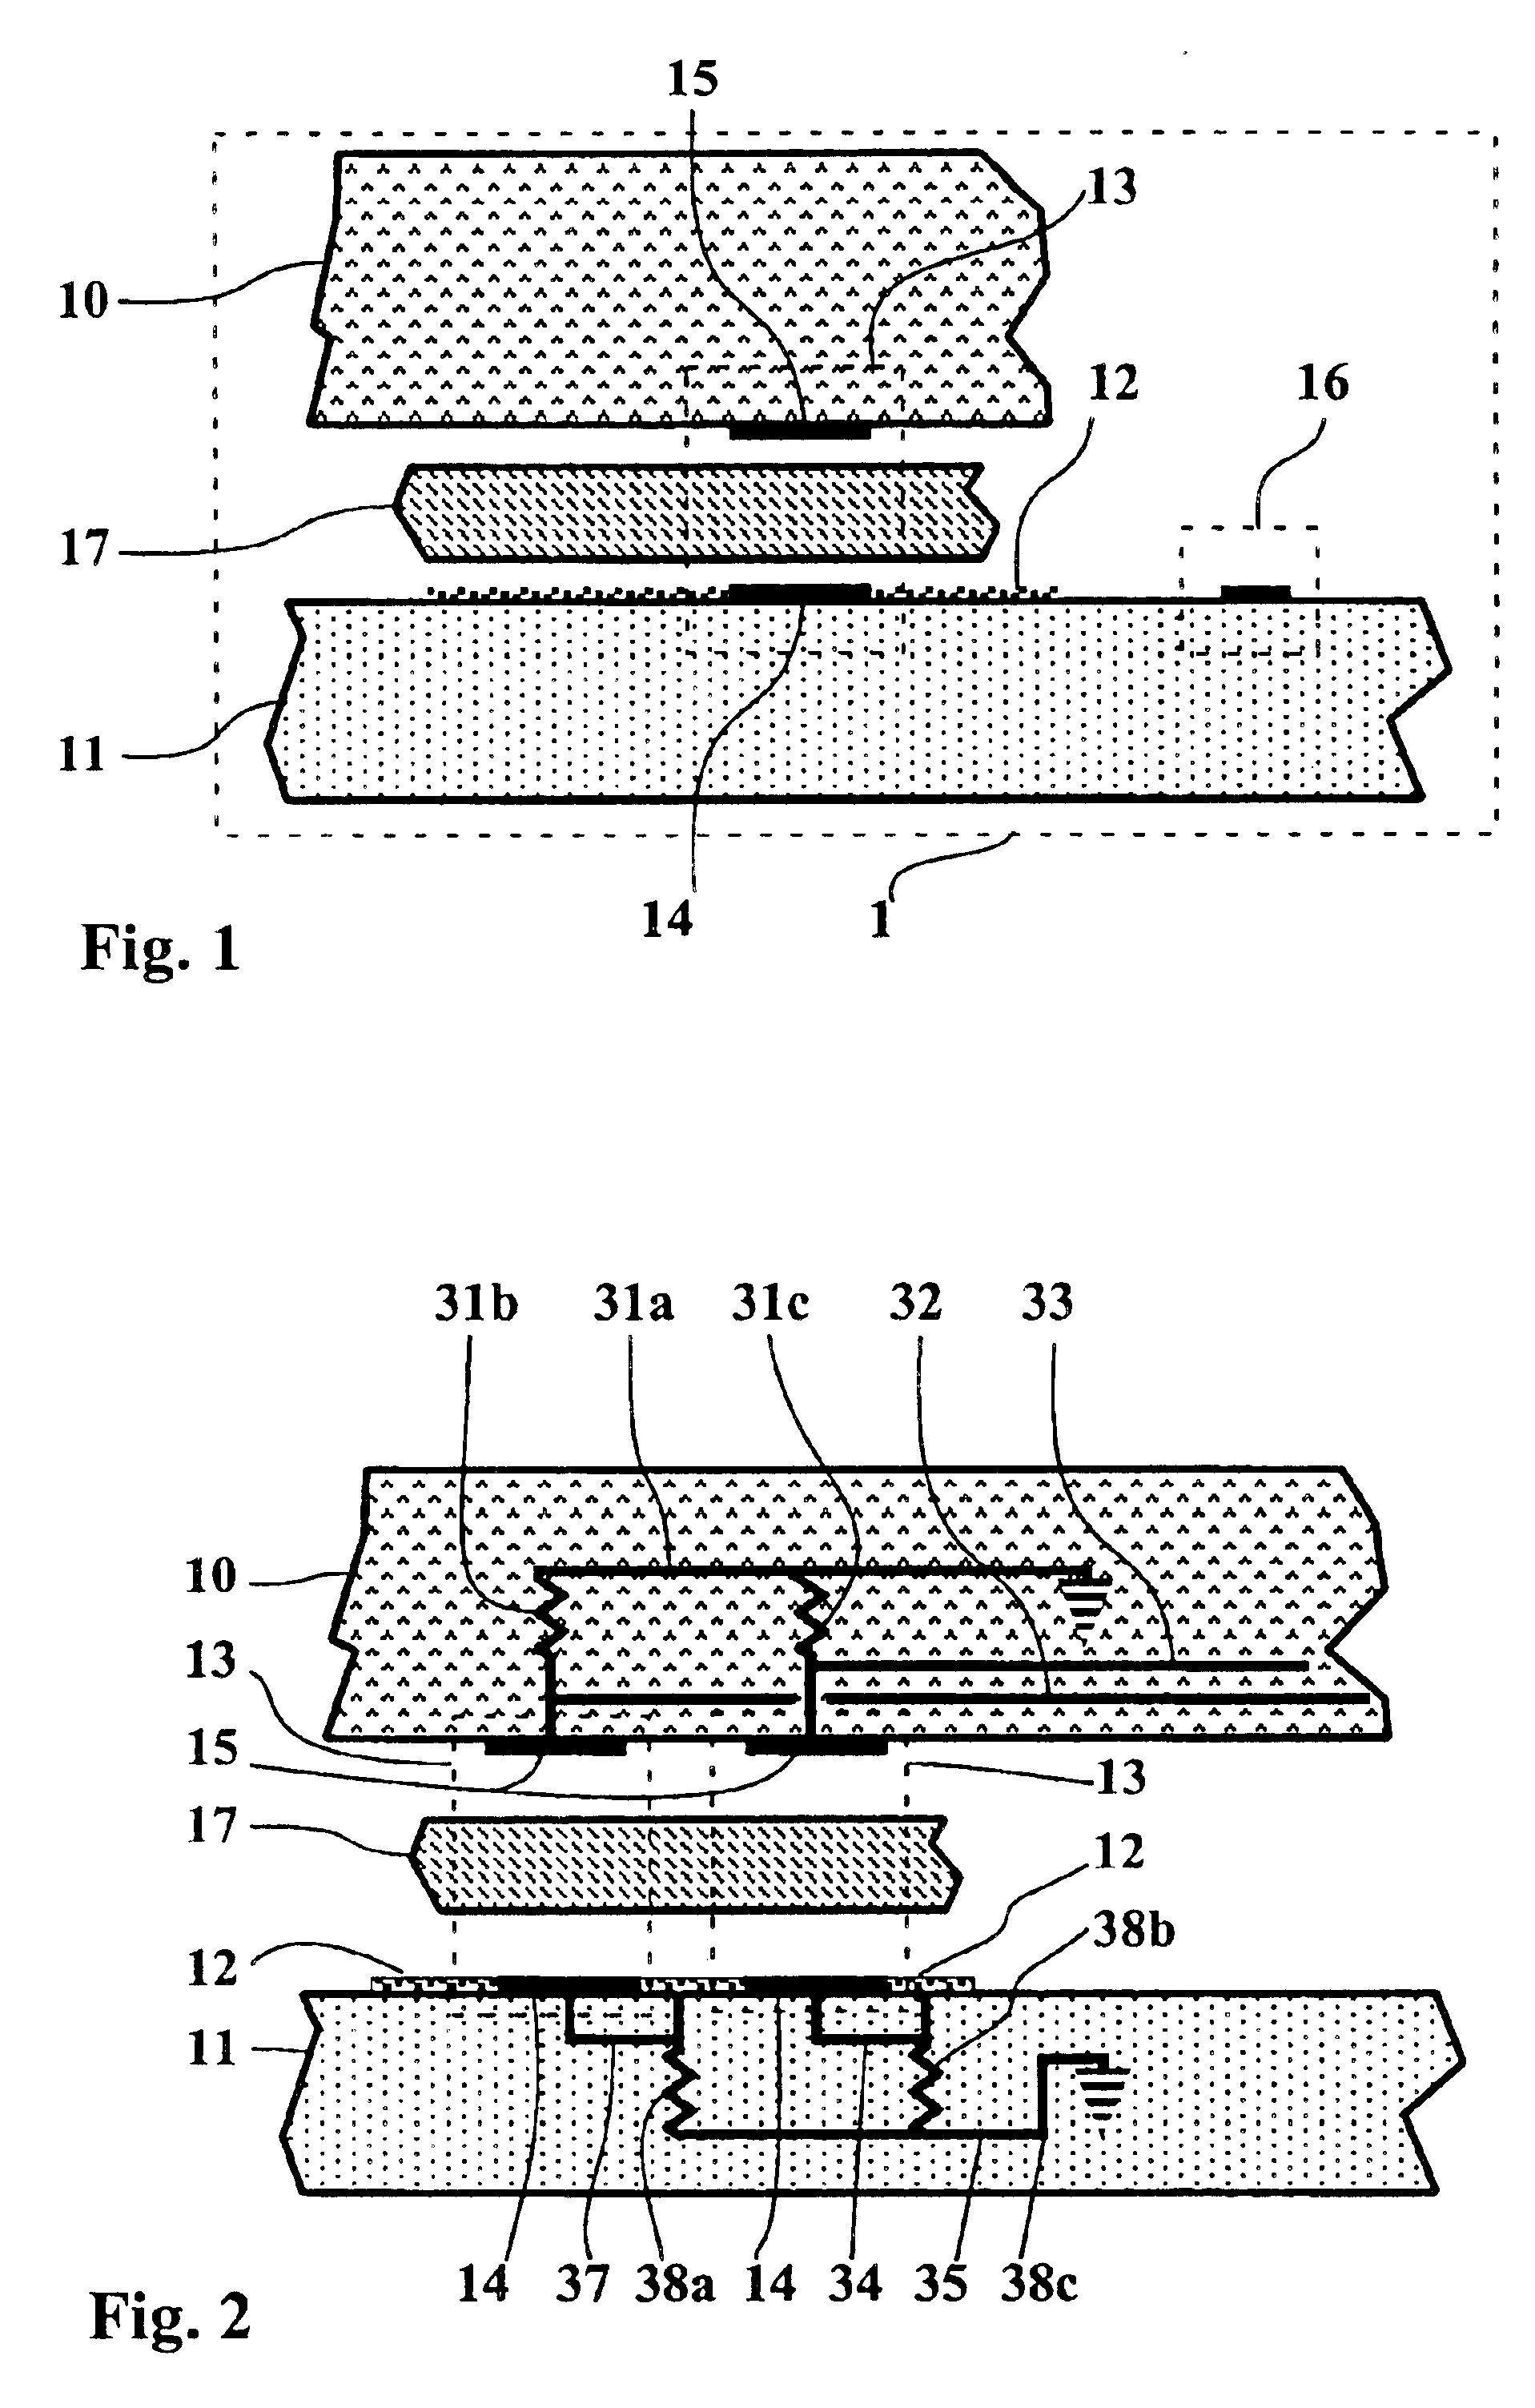 Method and apparatus for non-conductively interconnecting integrated circuits